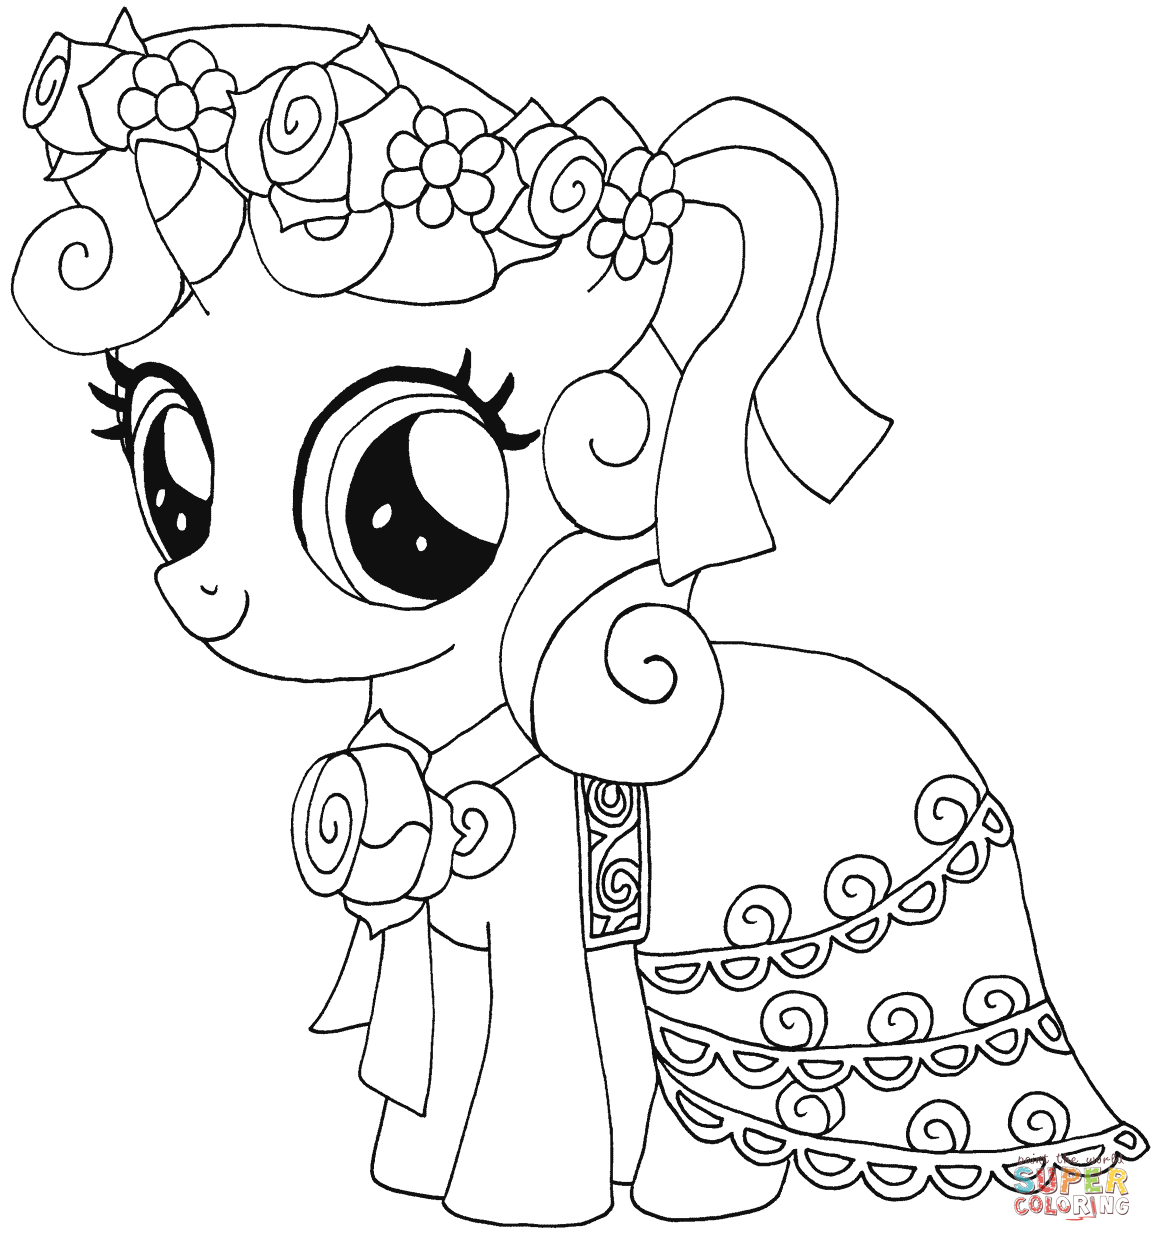 Sweetie Belle coloring page